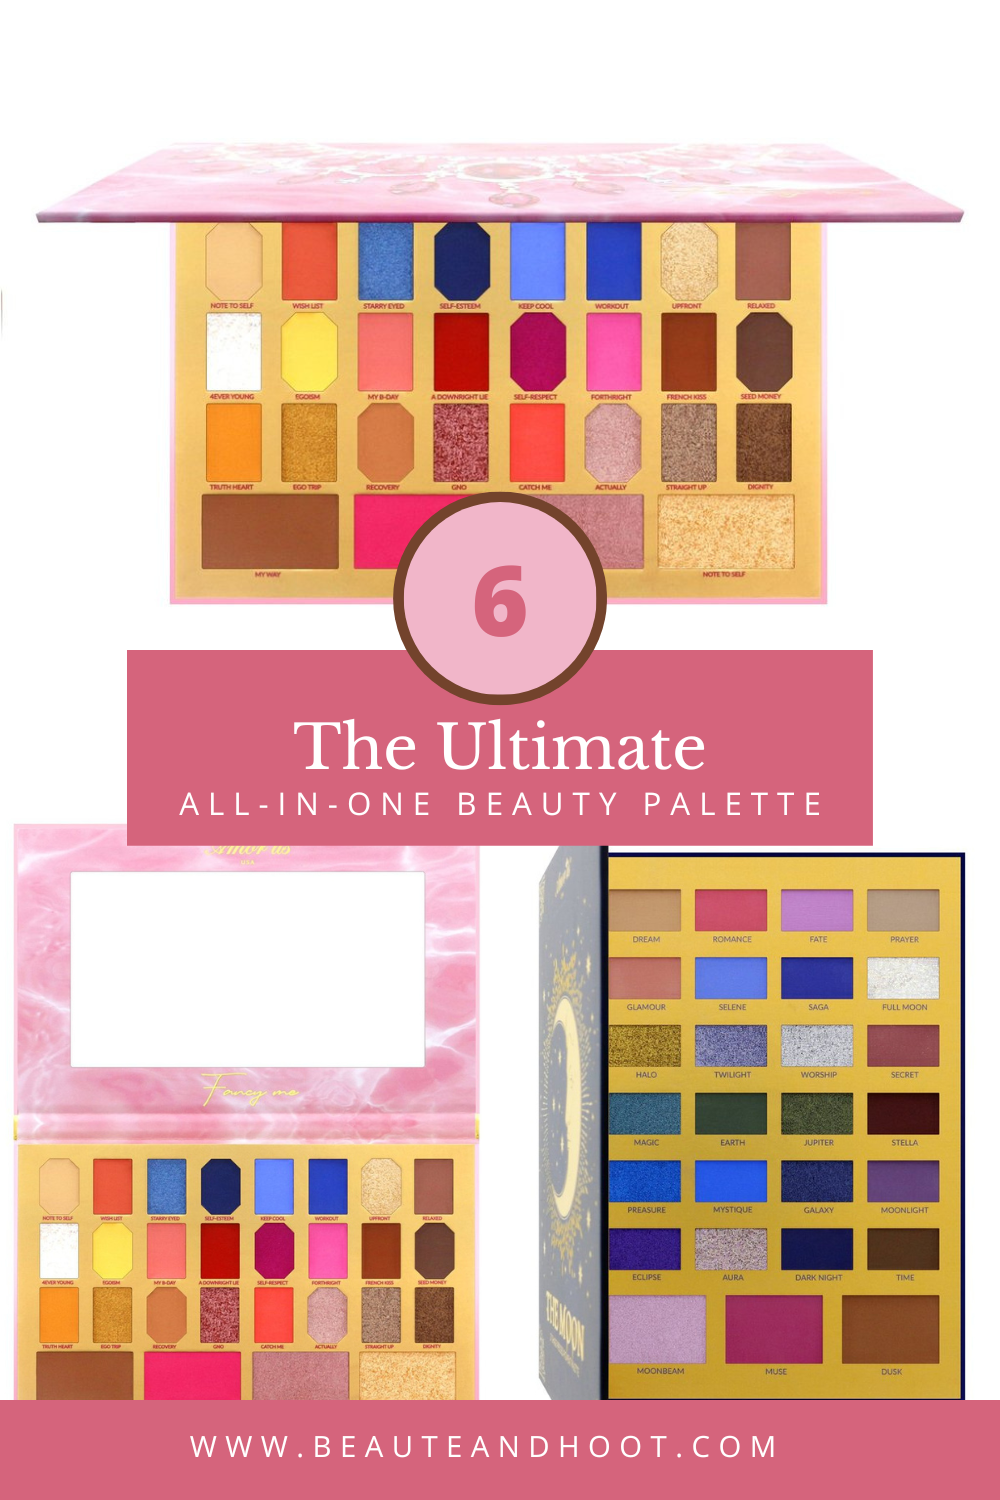 The Ultimate All-In-One Beauty Palette